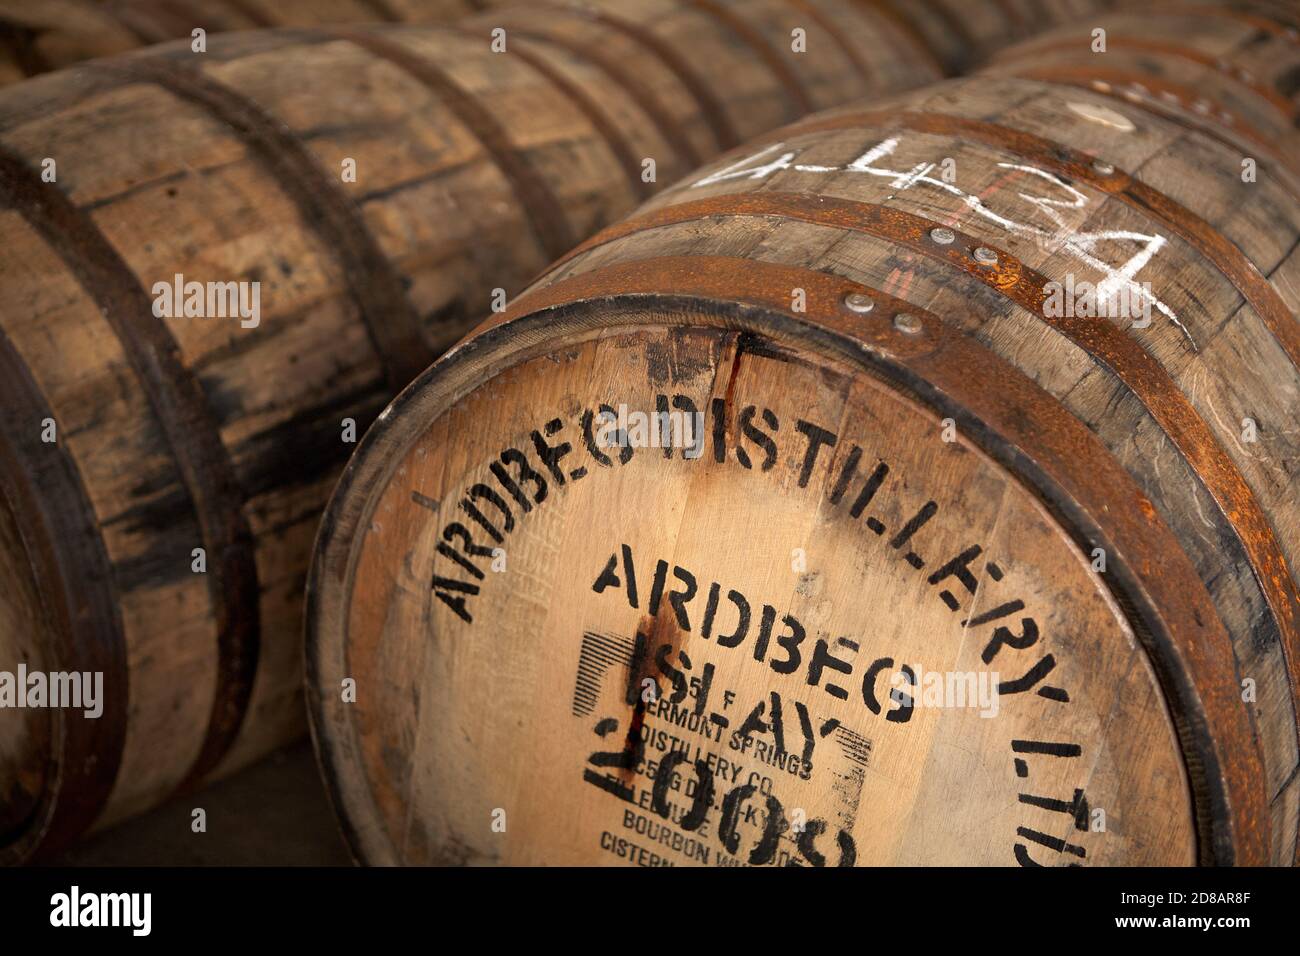 Rows of Scotch Whisky Barrels in a Warehouse Stock Photo